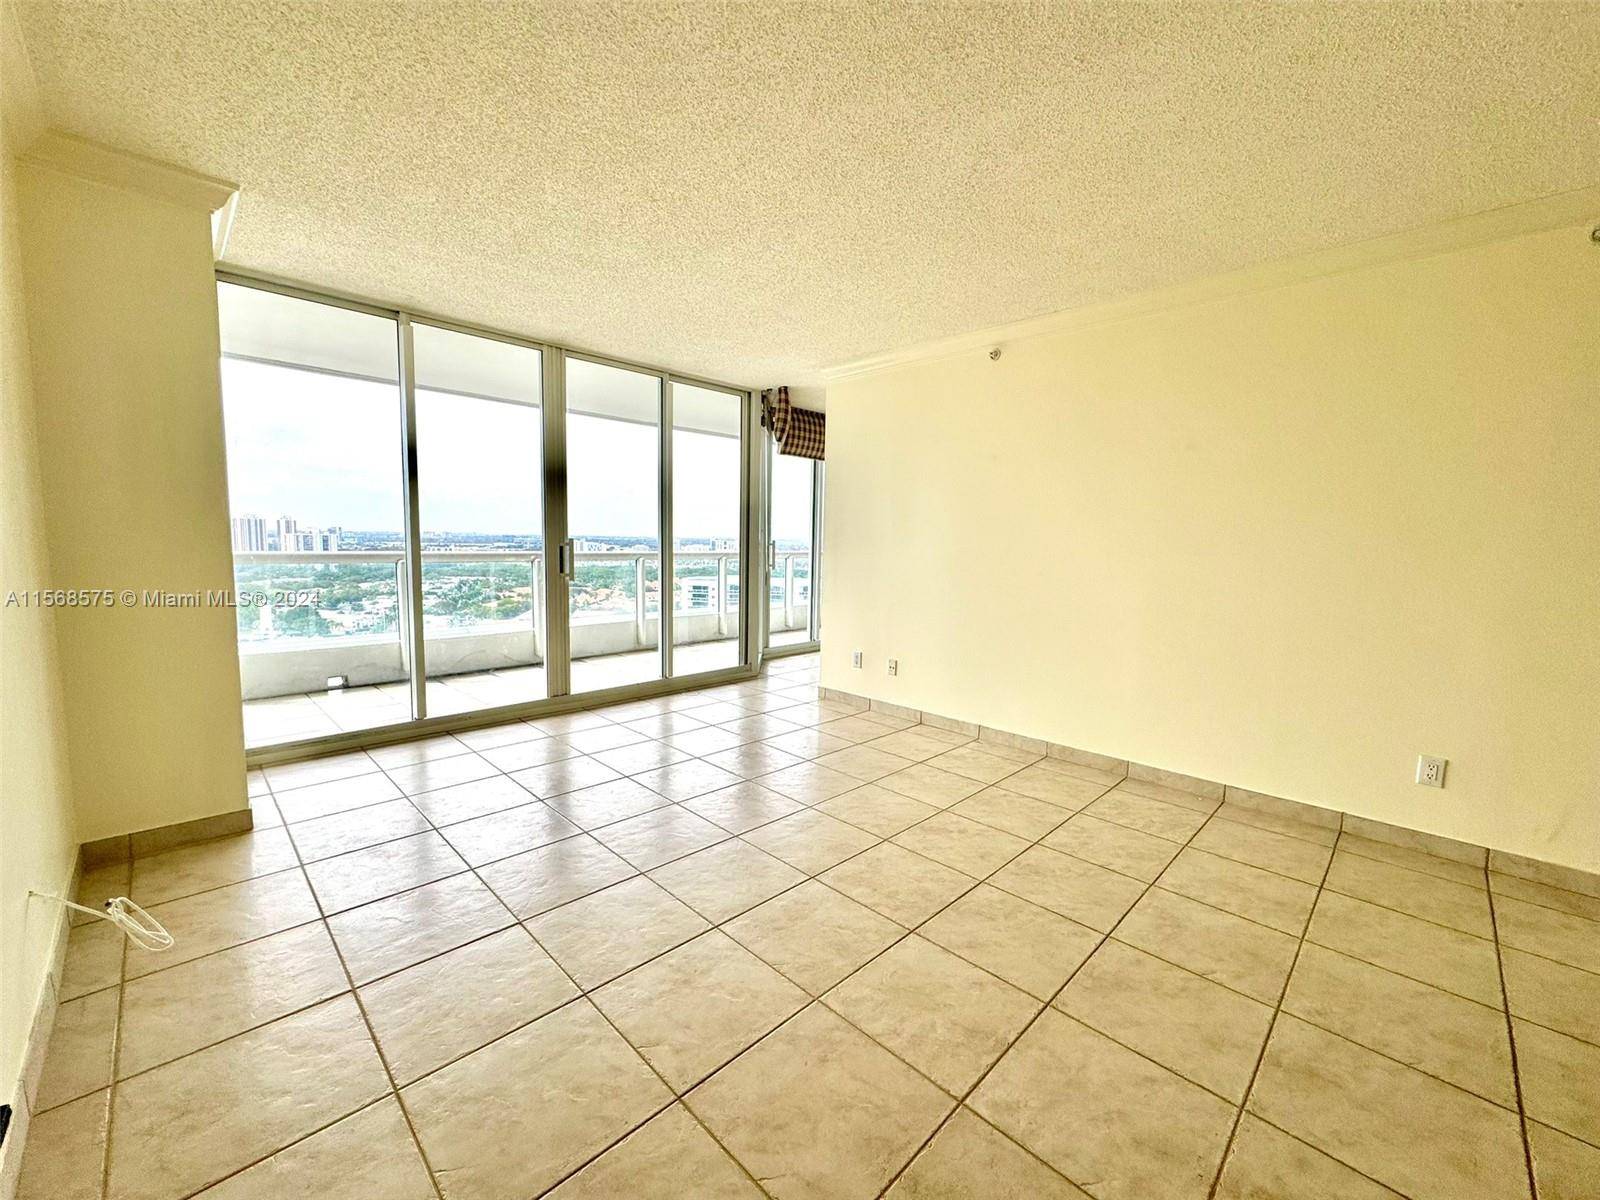 Experience luxury living in this 2 bed, 2 bath condo at prestigious North Tower at The Point.